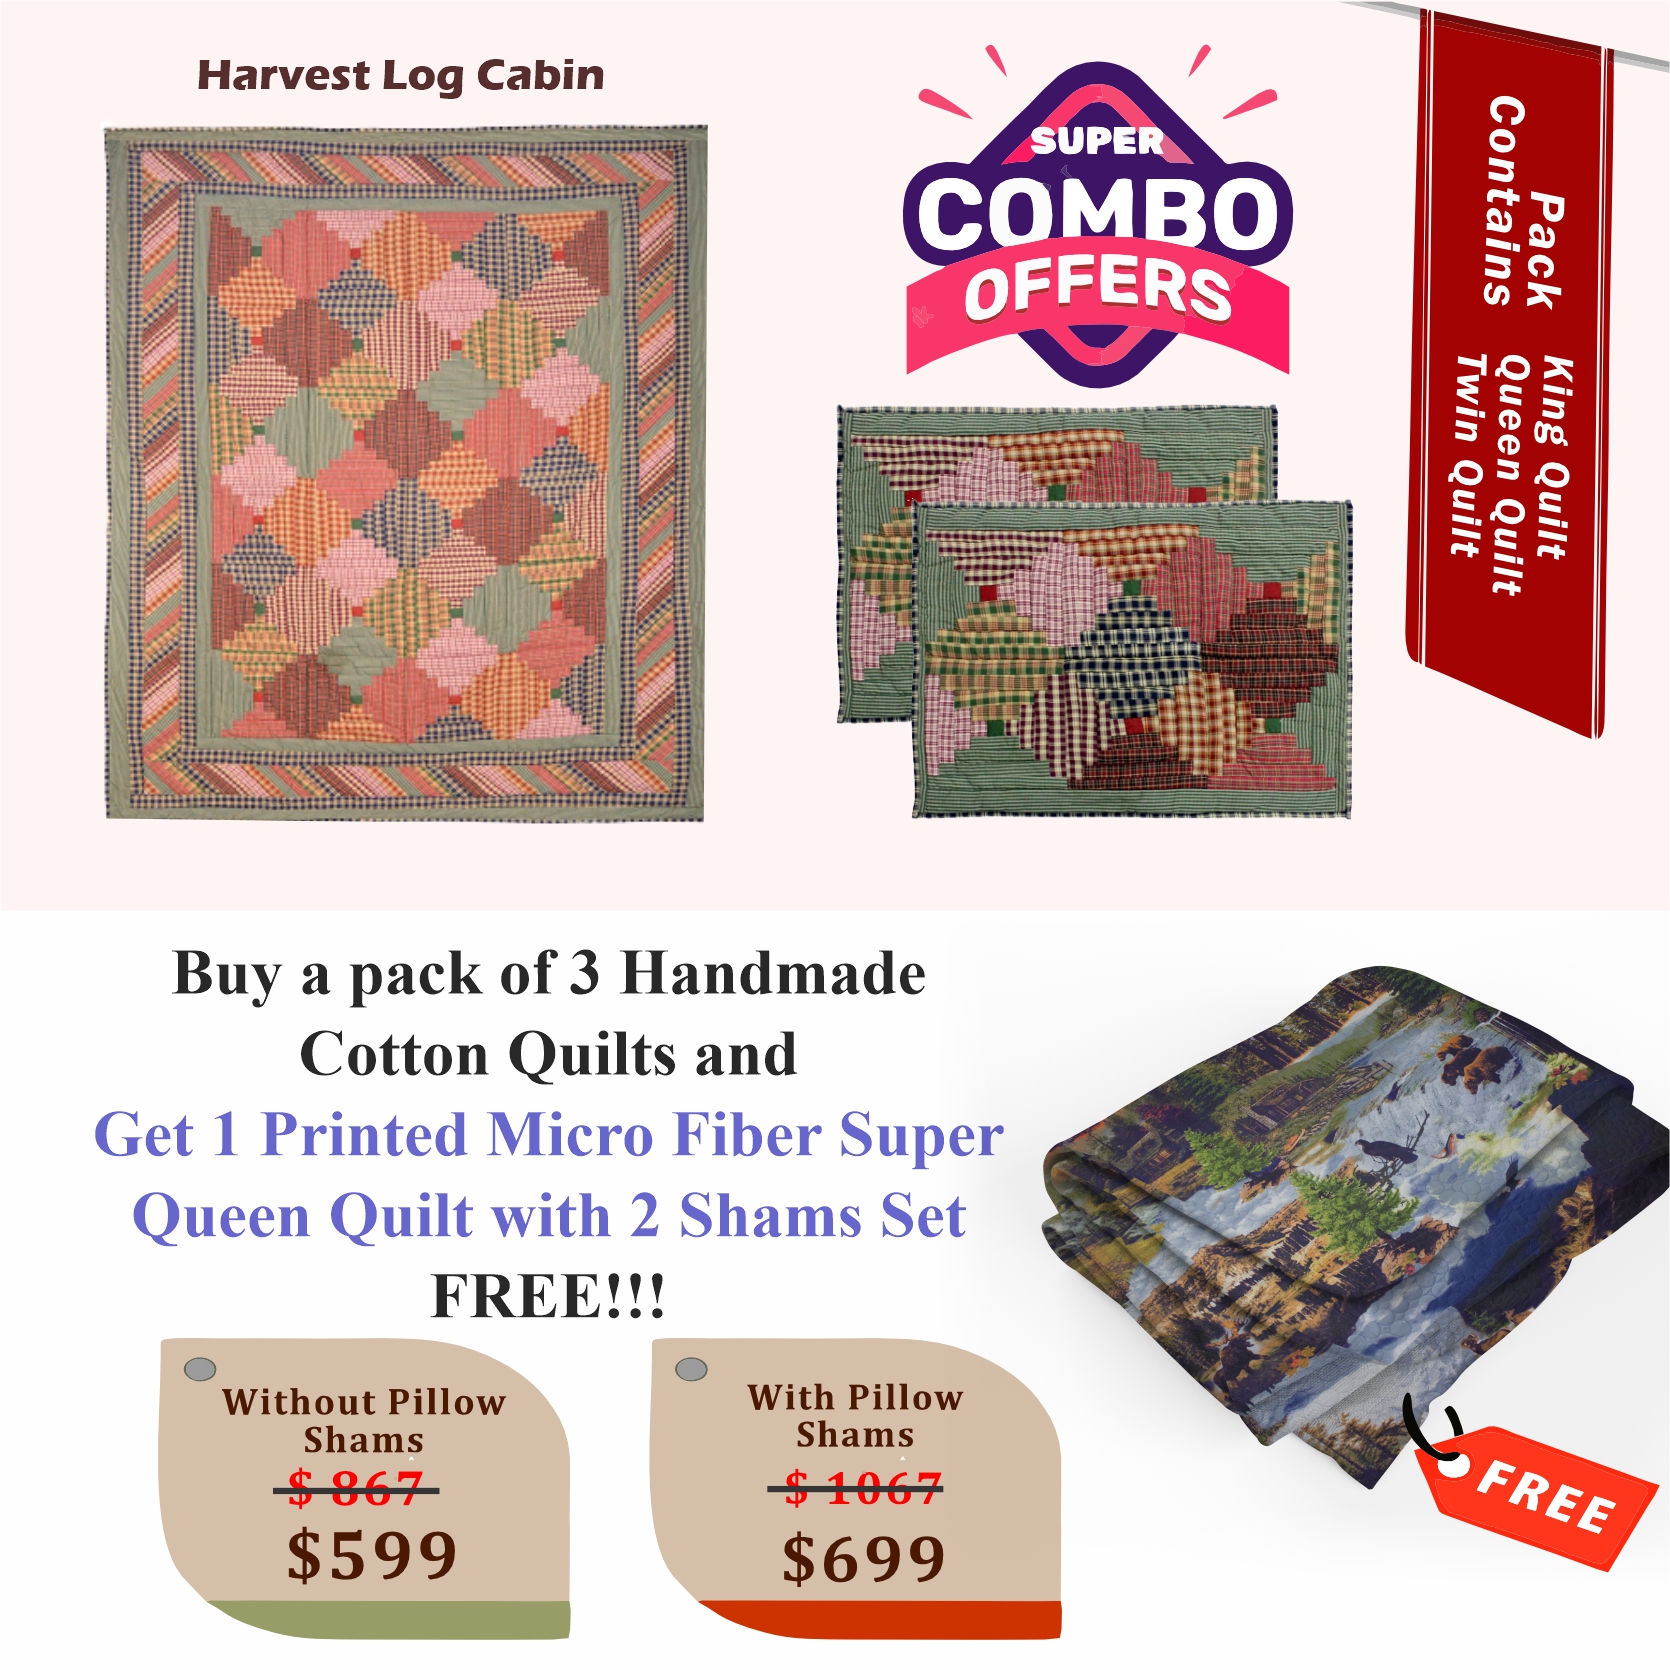 Harvest Log Cabin - Handmade Cotton quilts  | Buy 3 cotton quilts and get 1 Printed Microfiber Super Queen Quilt with 2 Shams set FREE